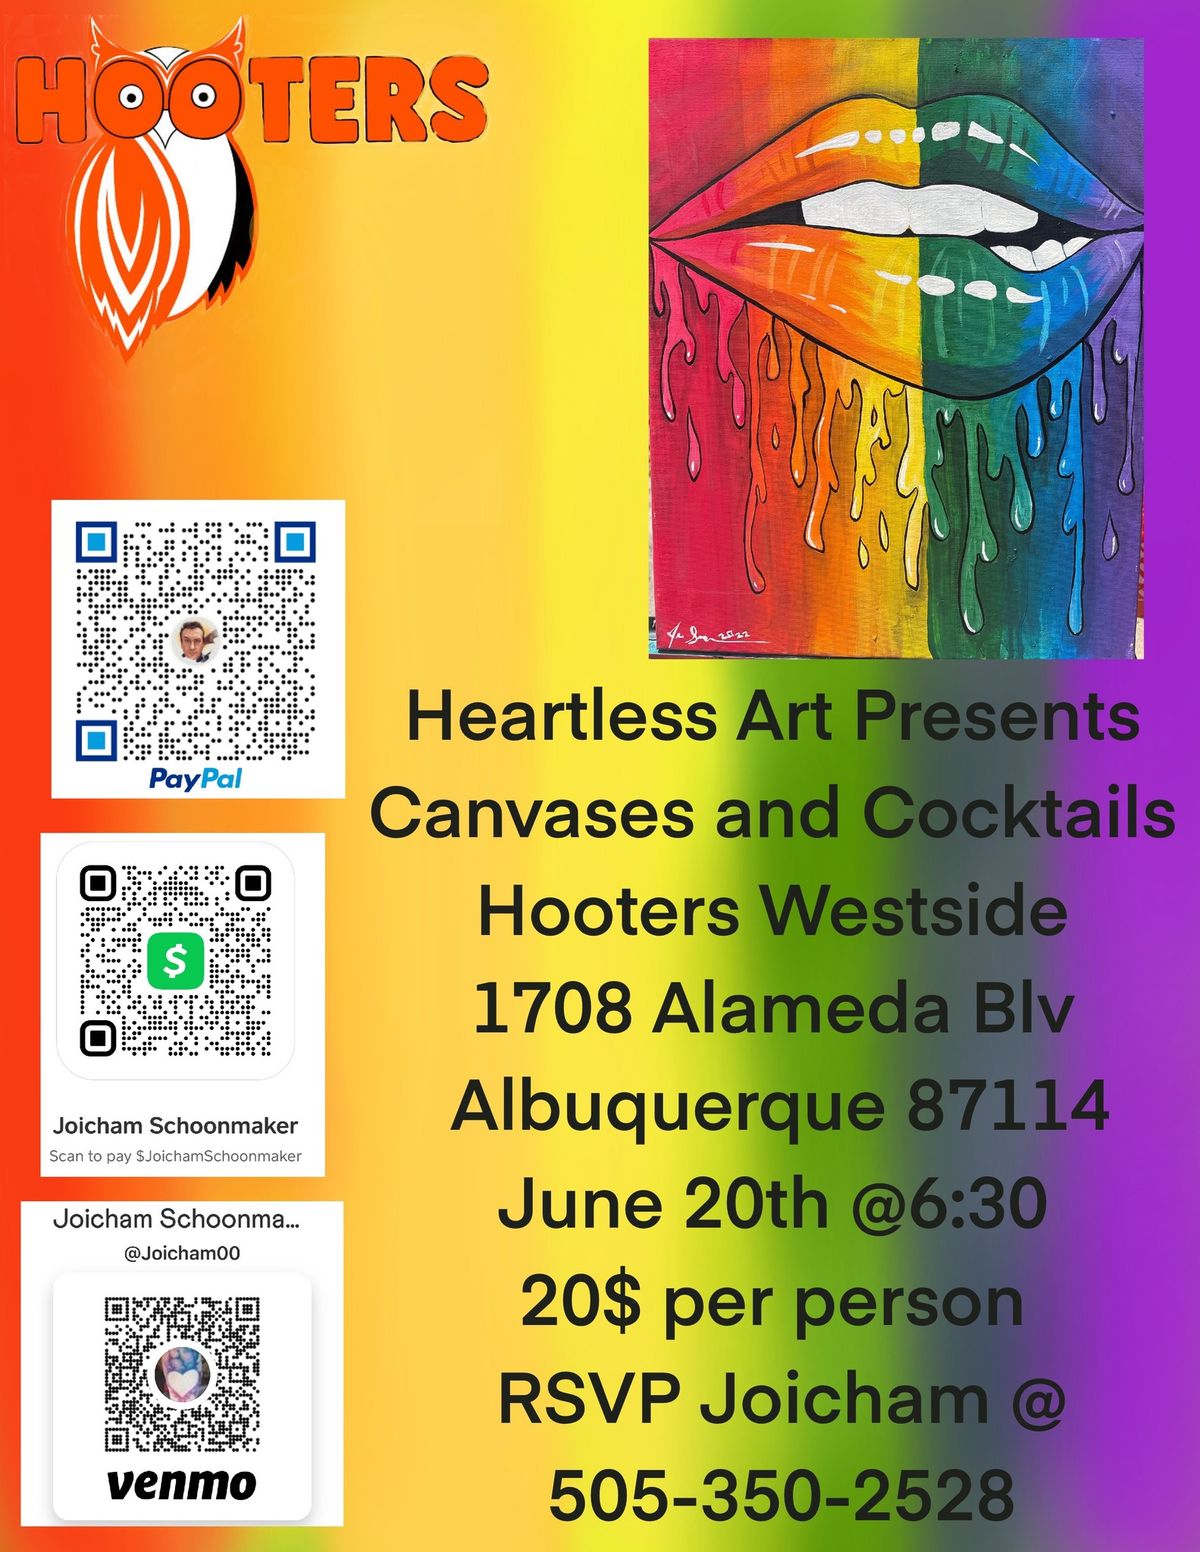 Heartless Art presents Canvases and Cocktails Sponsored by Hooters west side